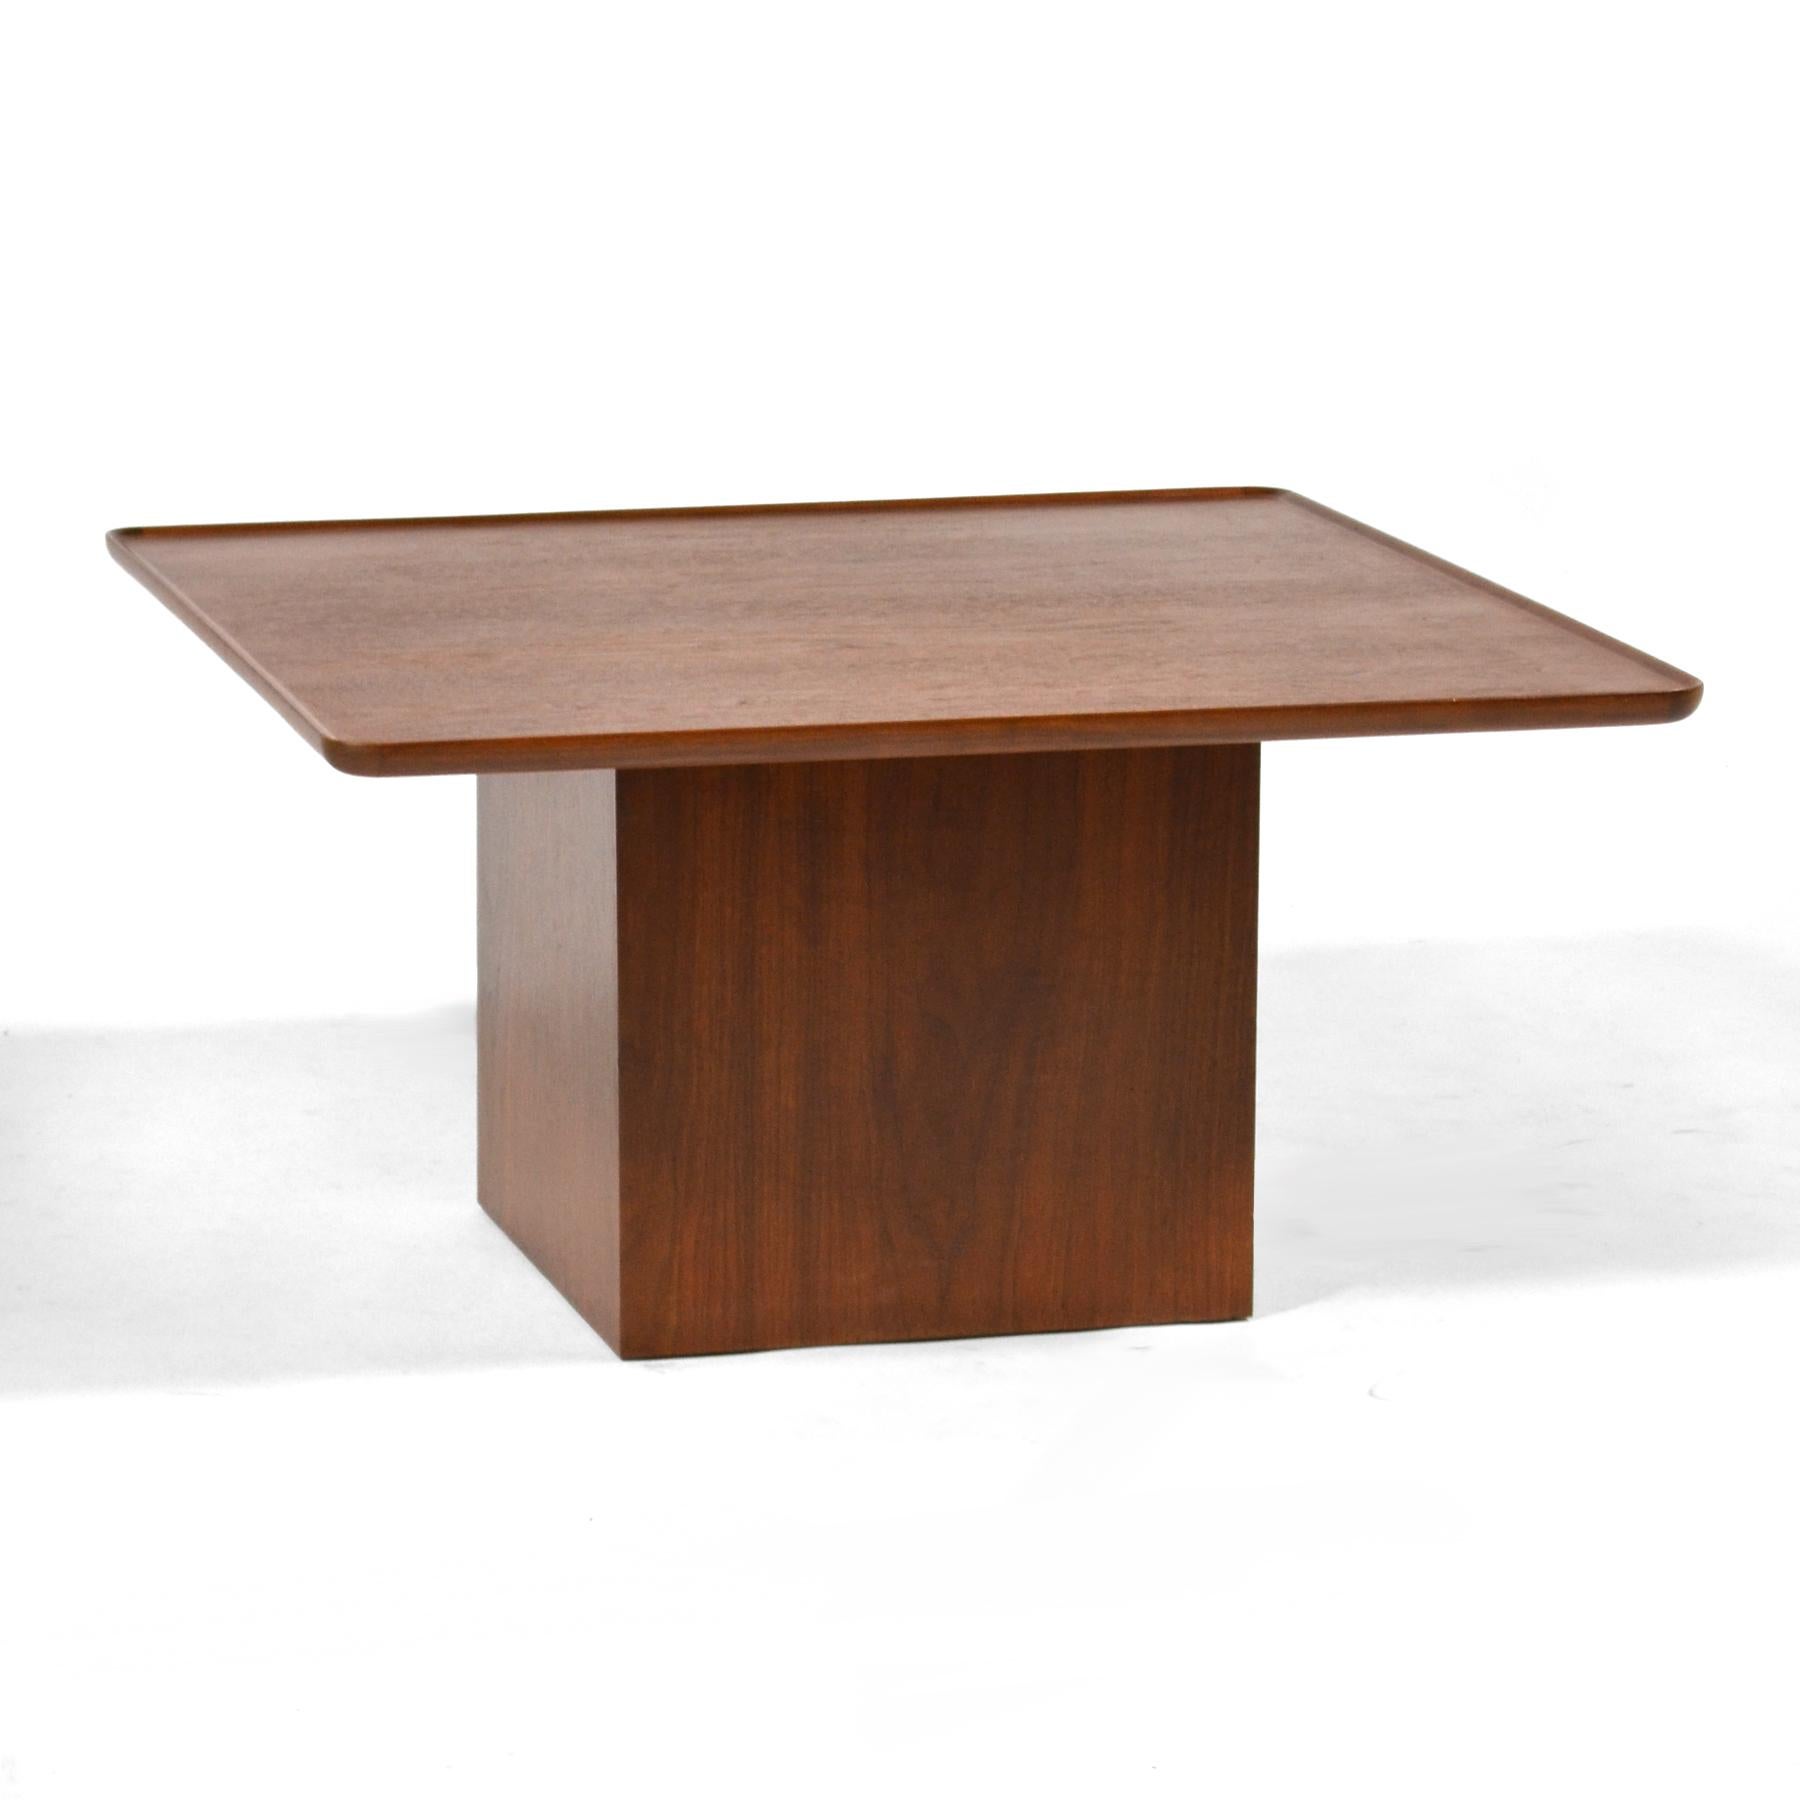 This handsome walnut Milo Baughman table by Arch Gordon has a top with a raised lip edge supported by a cube shaped pedestal base. Nicely scaled, it can serve either as an end table or a small coffee table.